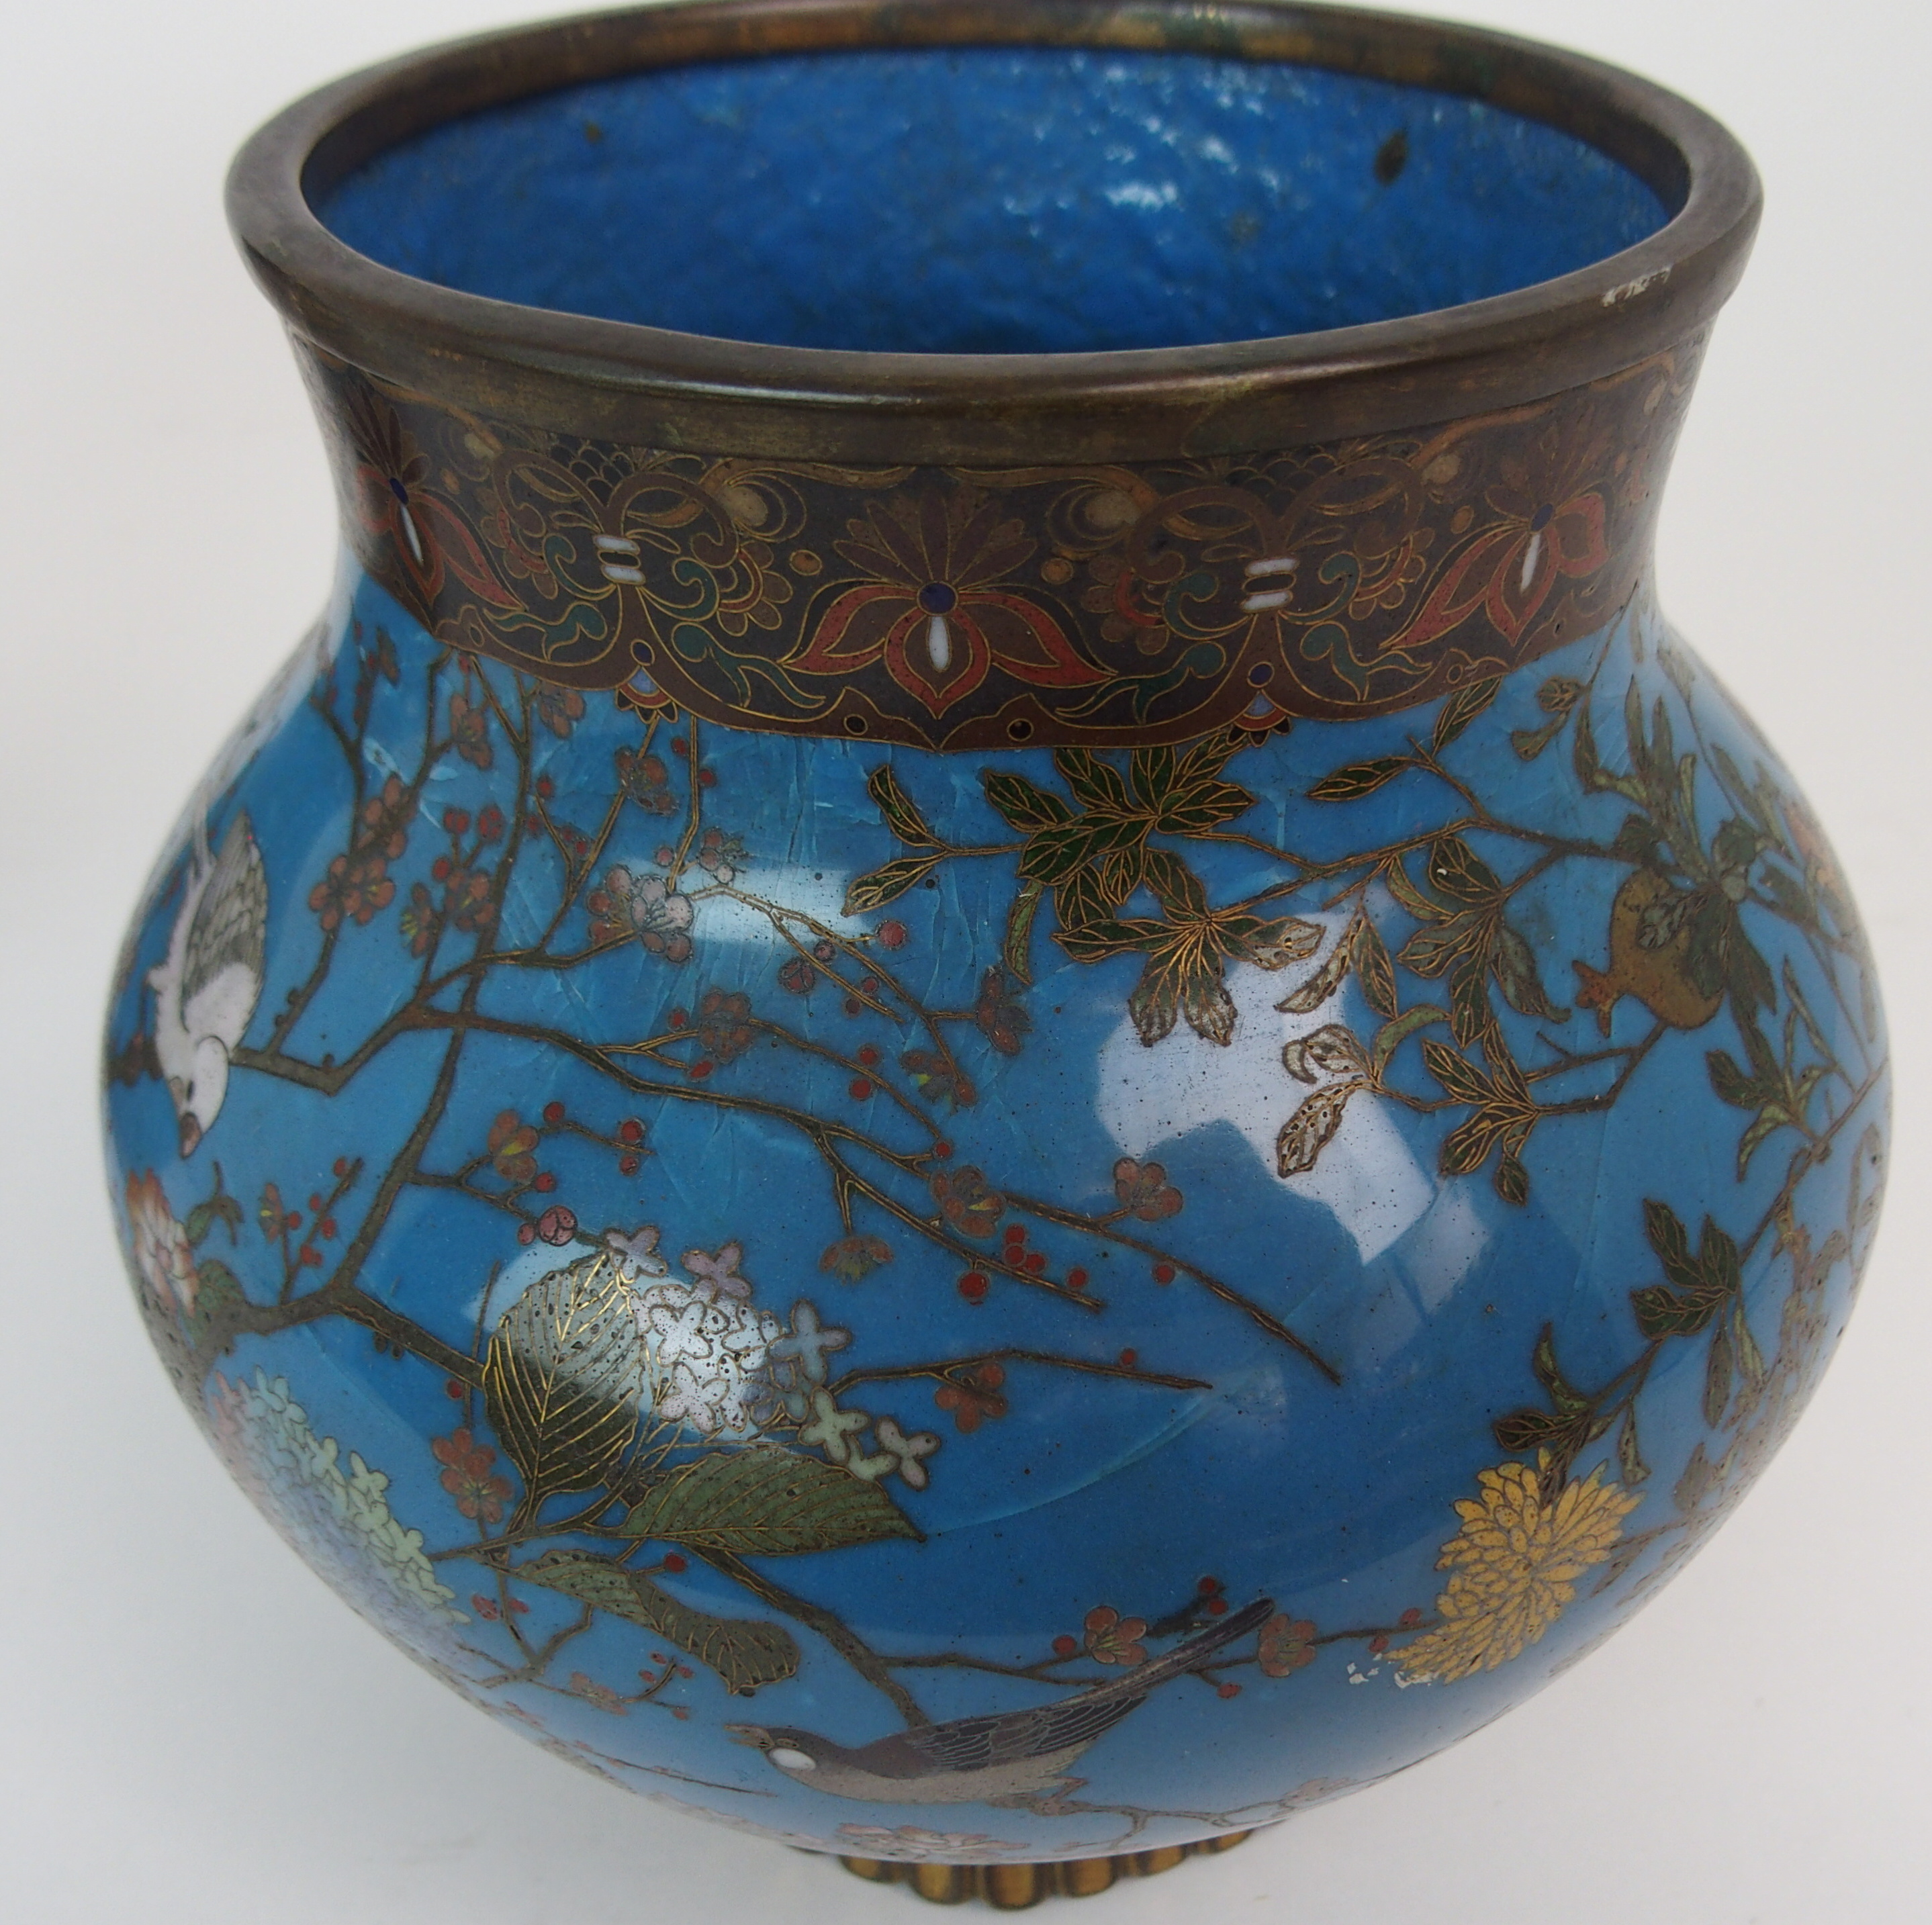 A PAIR OF CLOISONNE GLOBULAR VASES decorated with birds in flowering branches on a blue ground and - Image 2 of 11